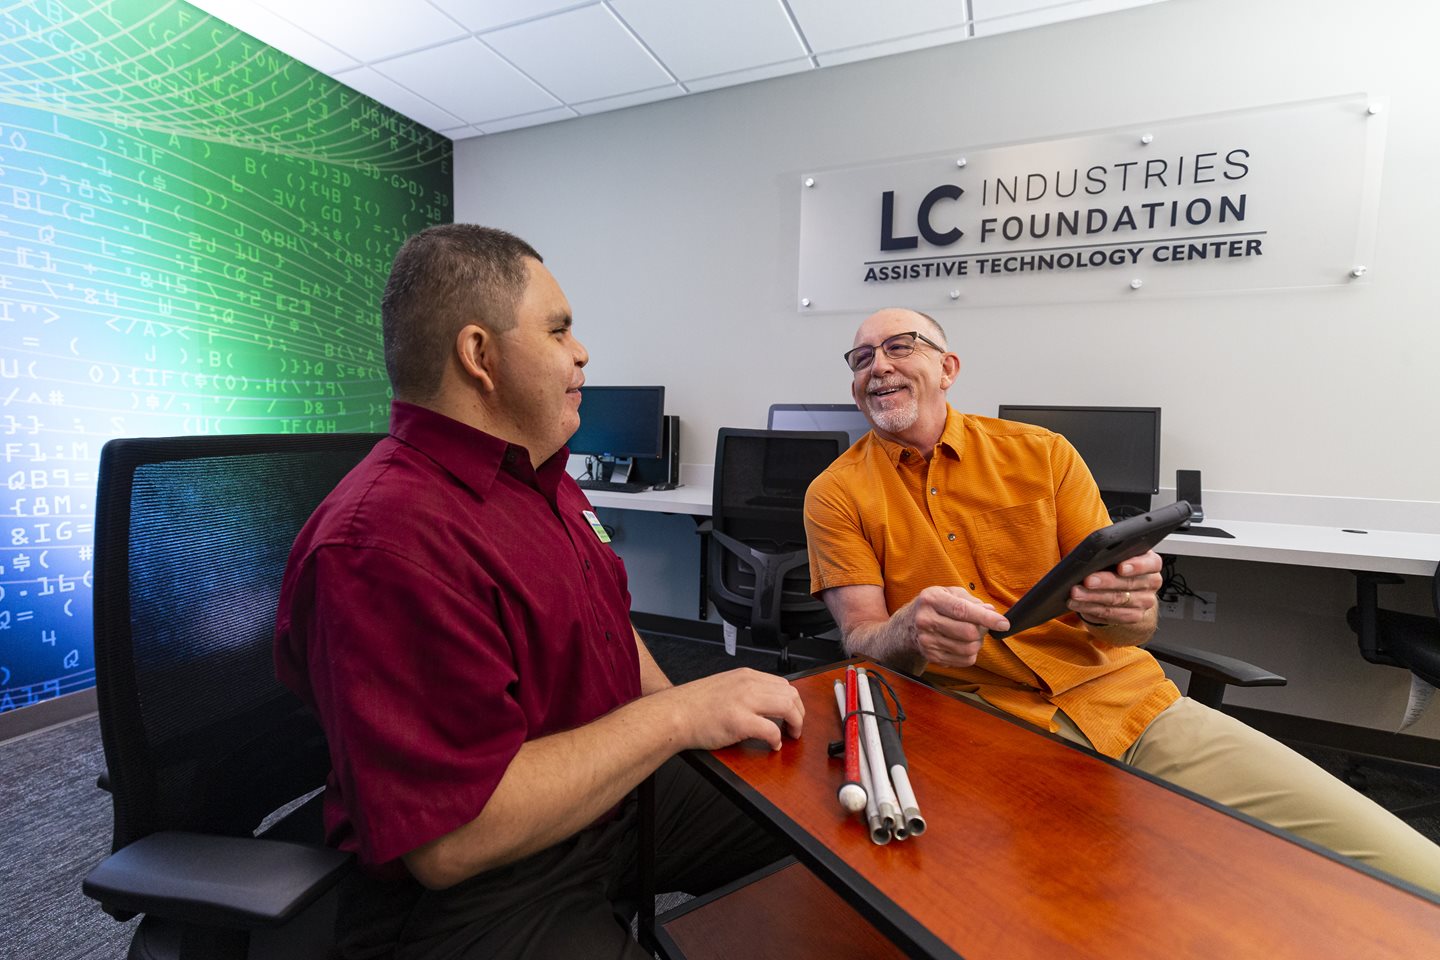 LC Industries Foundation Assistive Technology Center